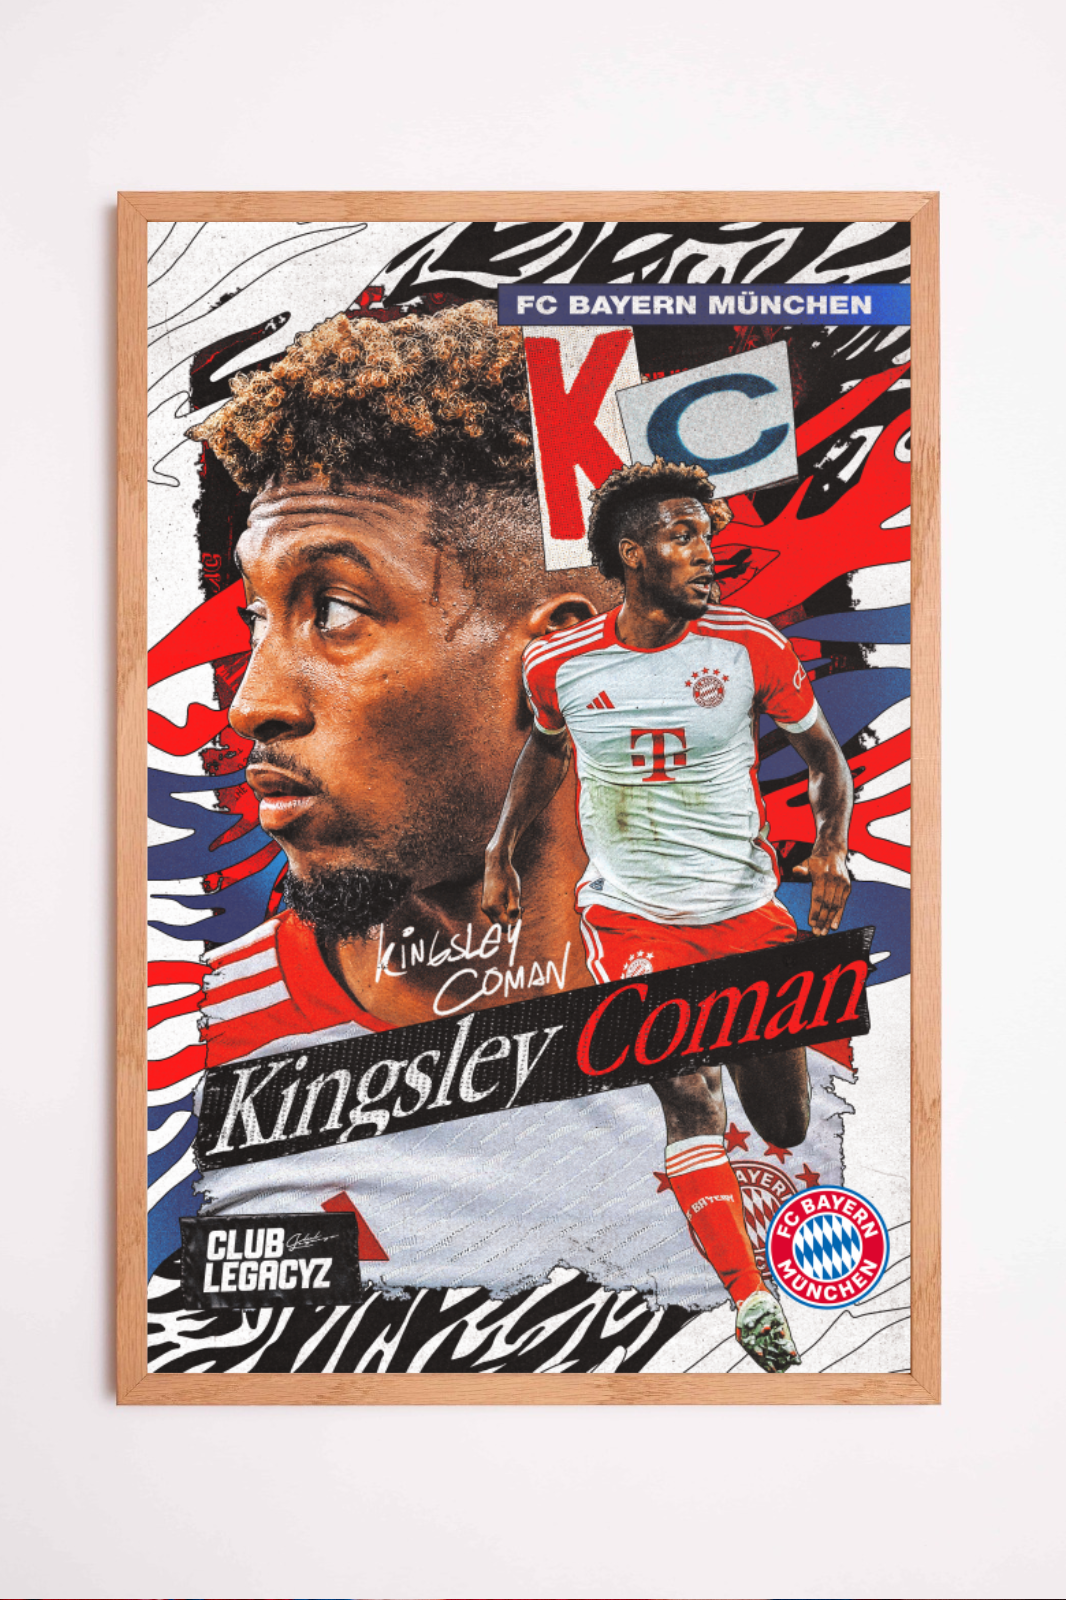 FC Bayern München - Kingsley Coman Poster limited to 100